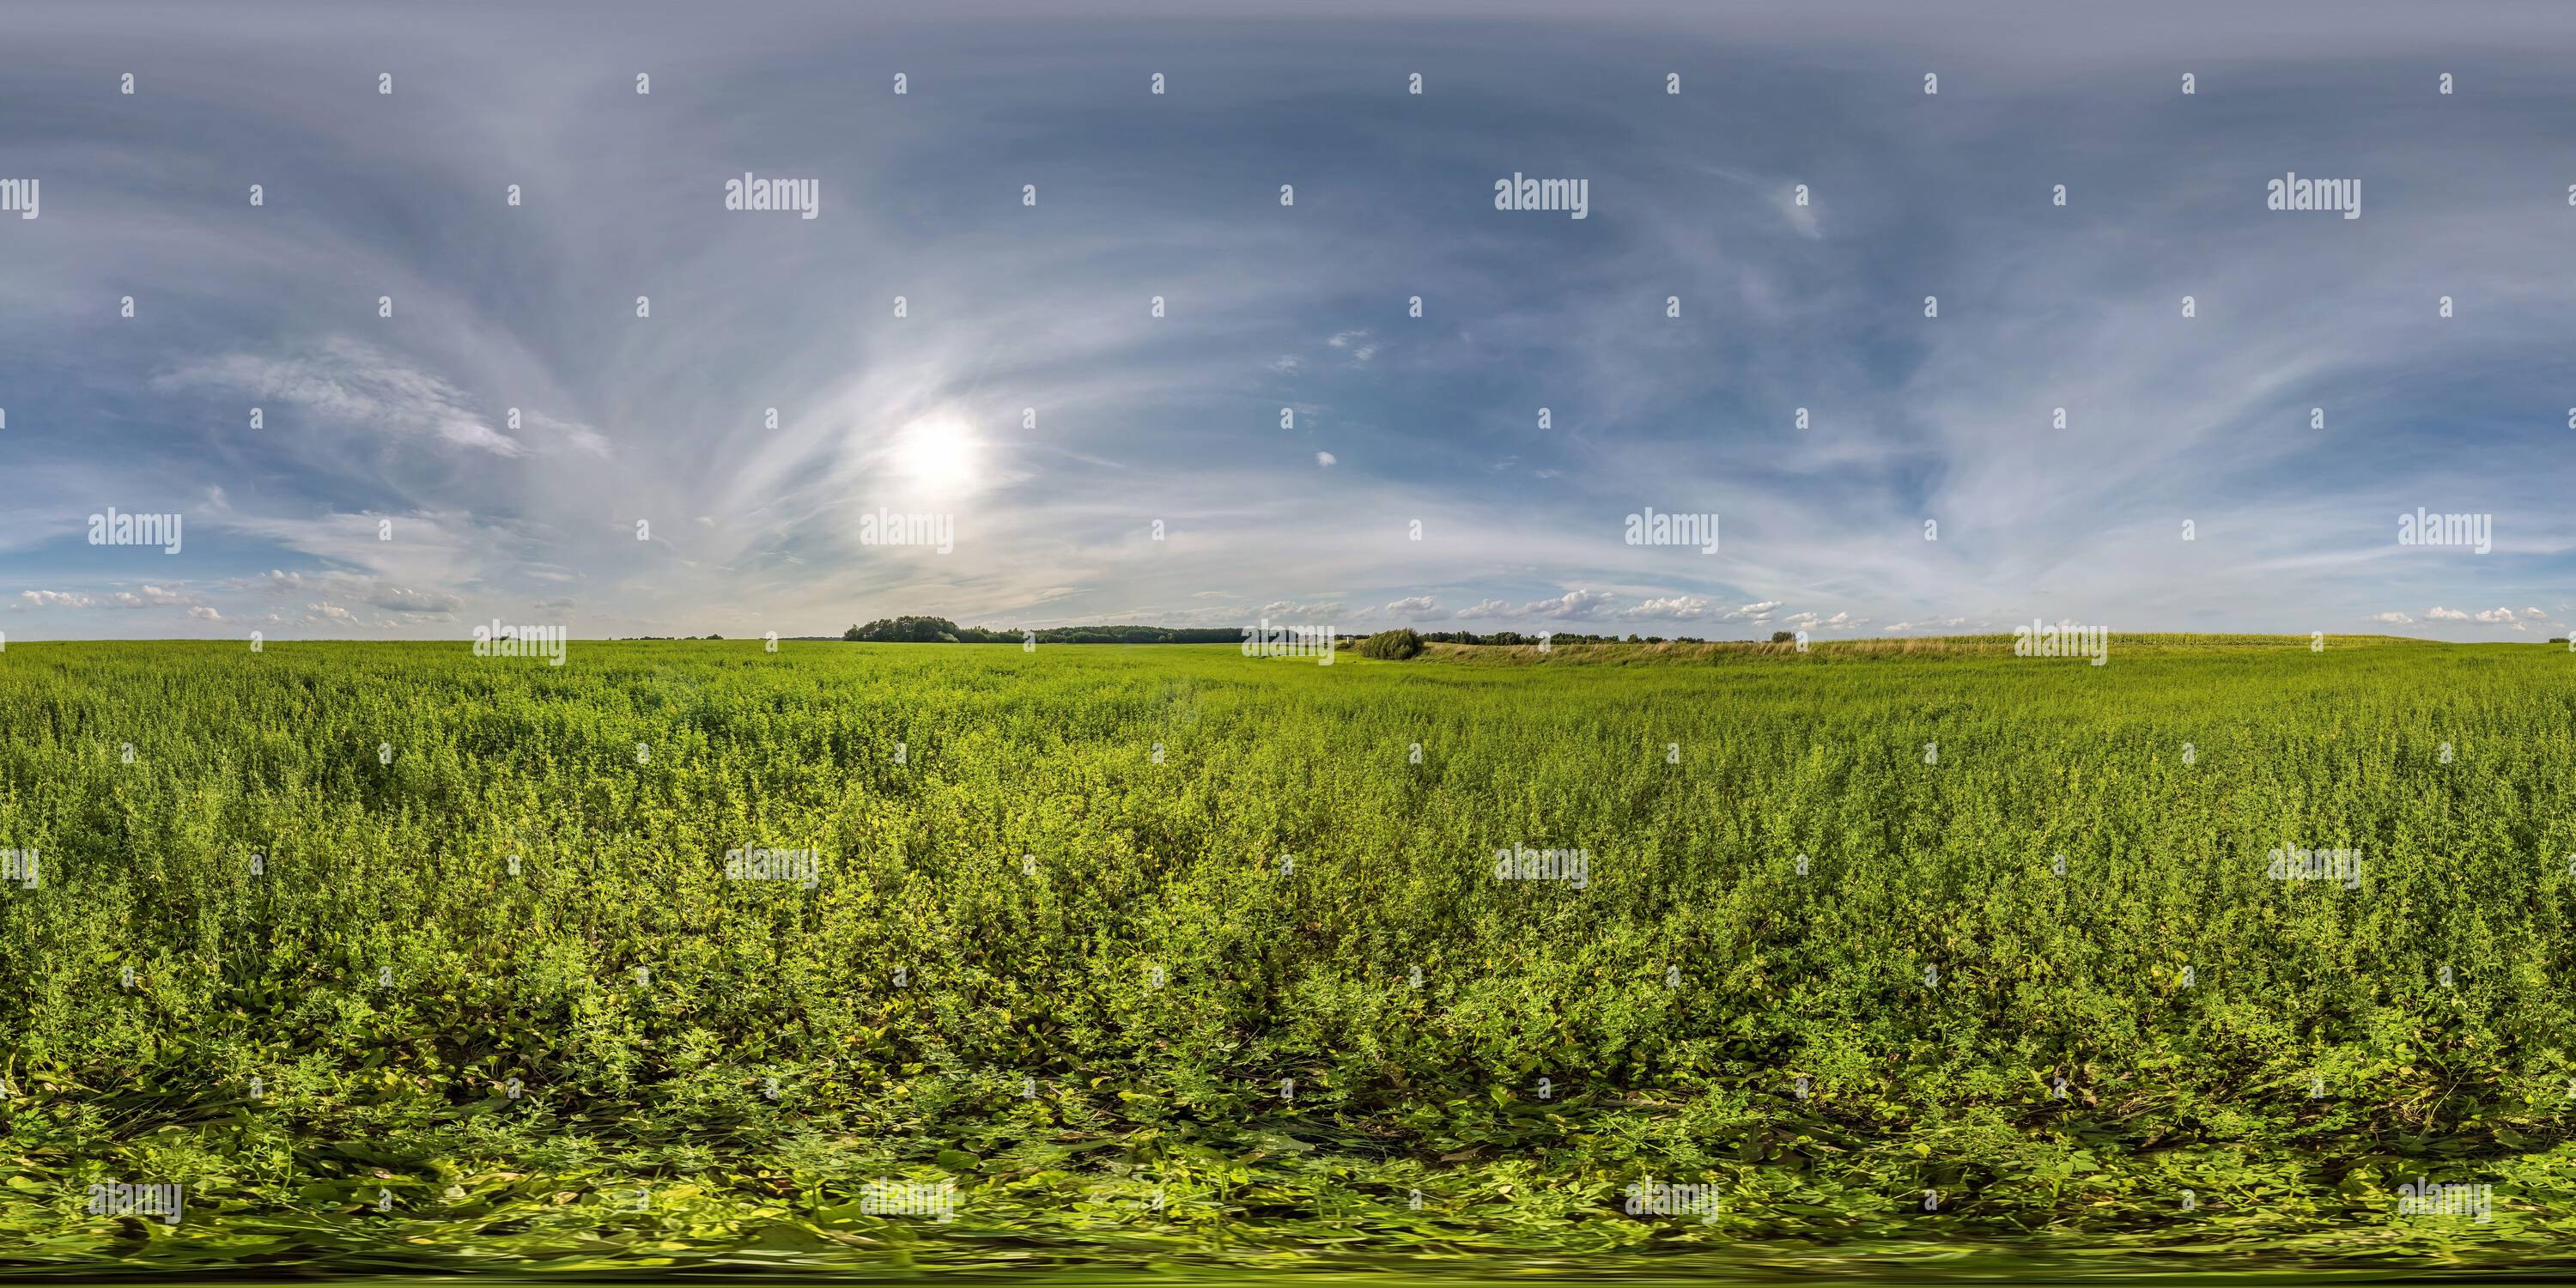 360° view of full seamless spherical hdri panorama 360 degrees angle view  among fields in summer evening sunset with awesome in equirectangular  projection with zen - Alamy